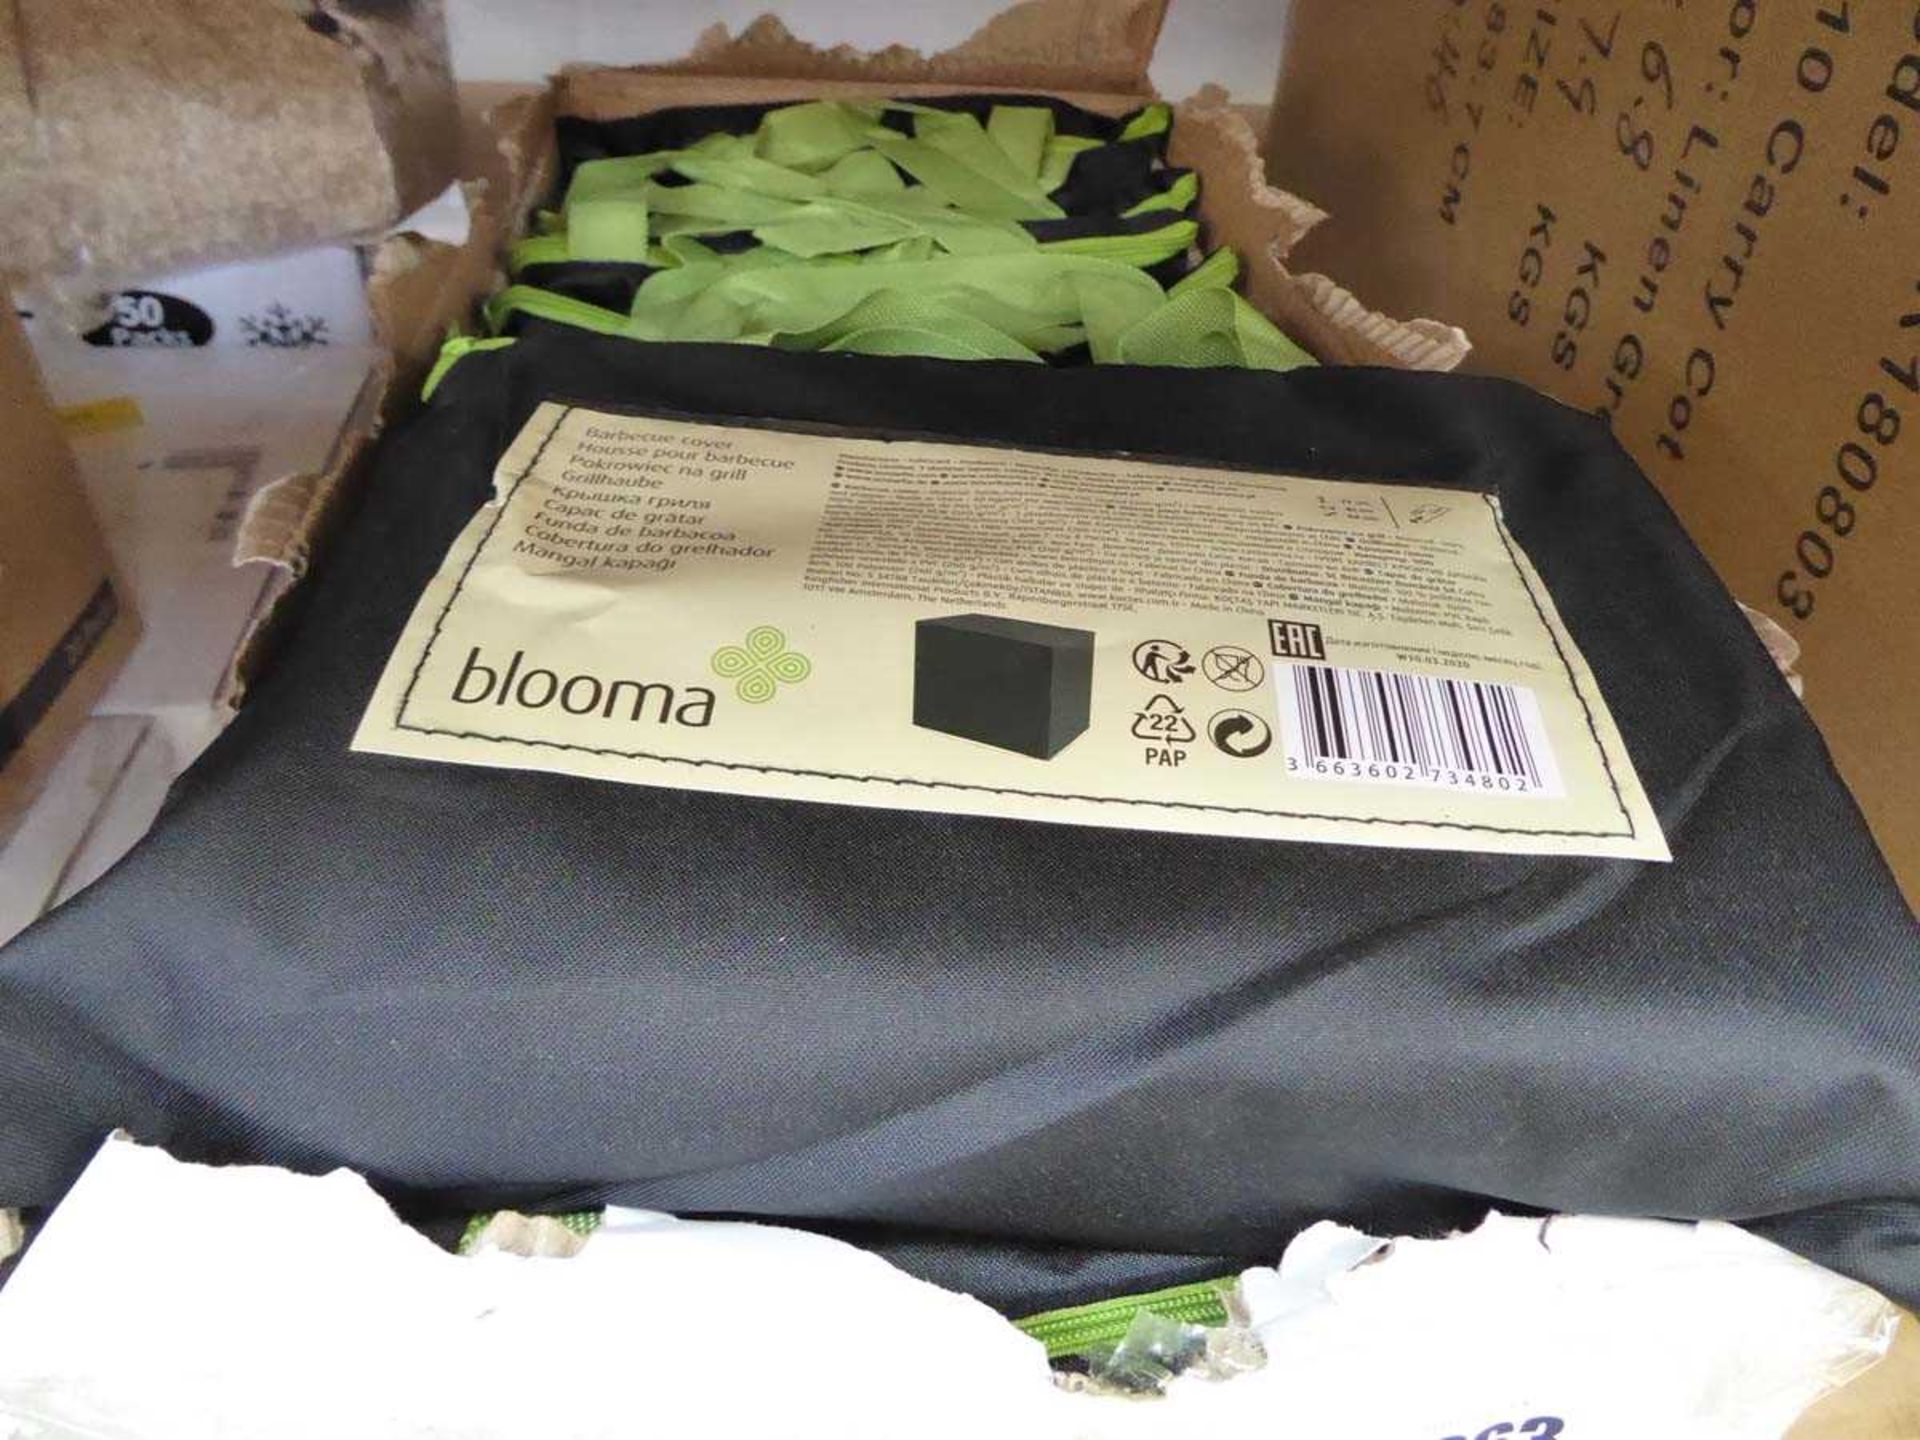 10 Blooma branded BBQ covers - Image 2 of 2